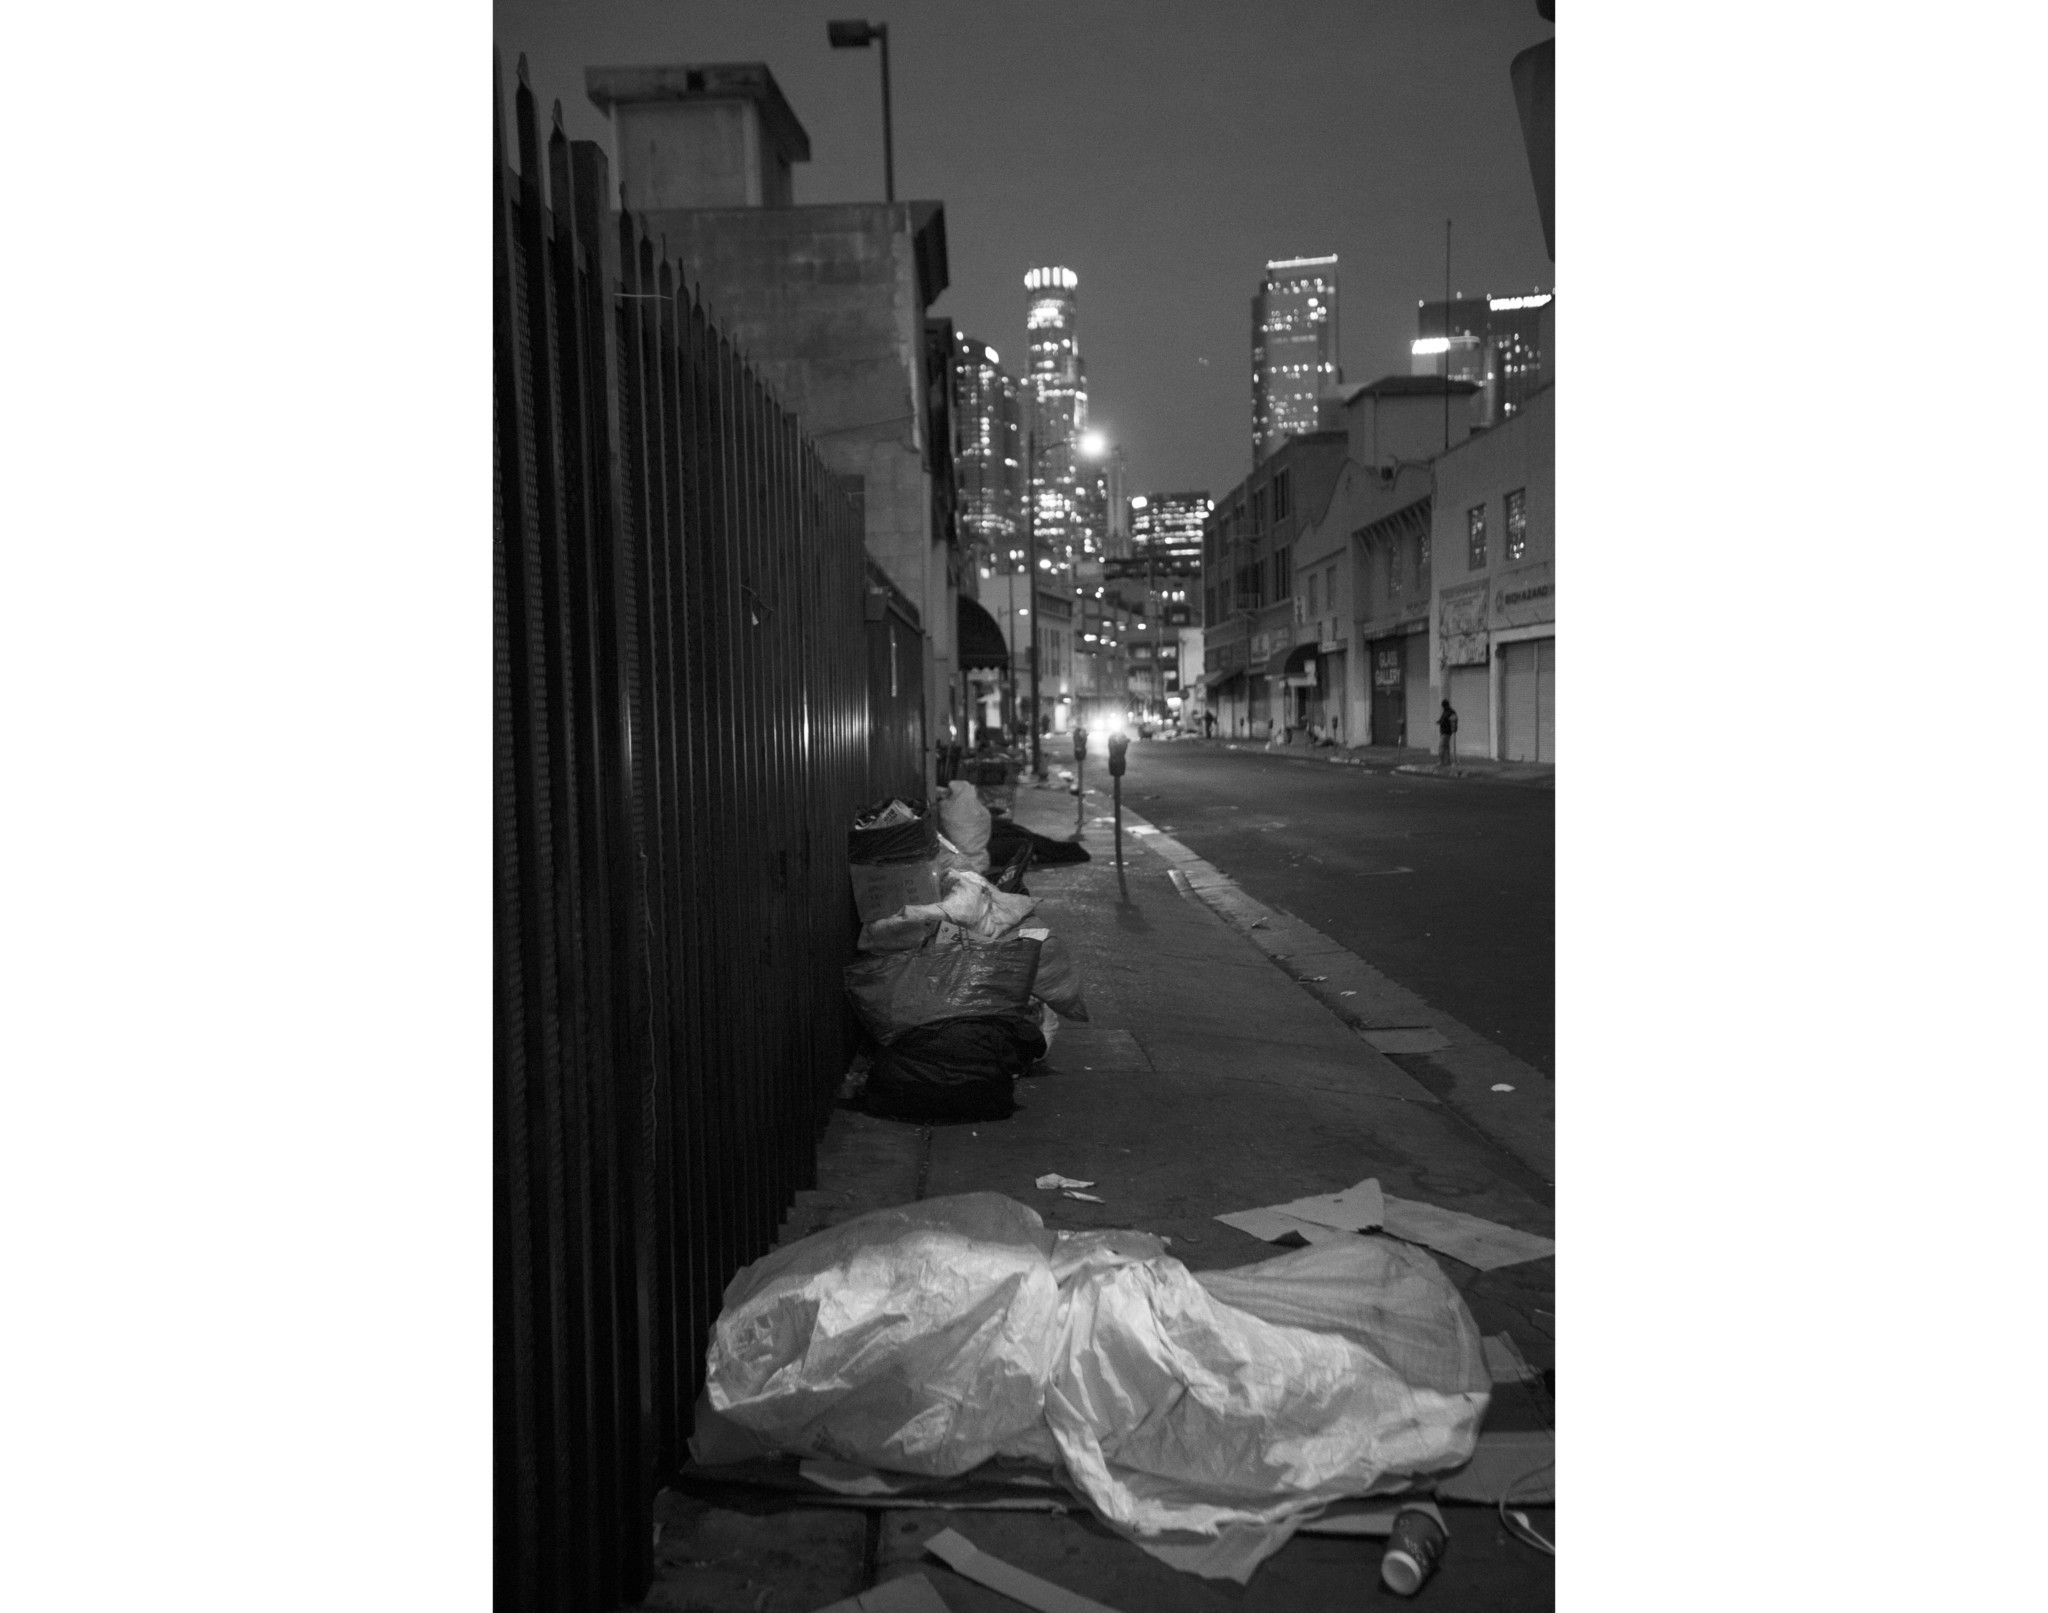 LOS ANGELES, CA NOVEMBER 15, 2017: At dawn people are sleeping on the sidewalk wrapped in tarps and